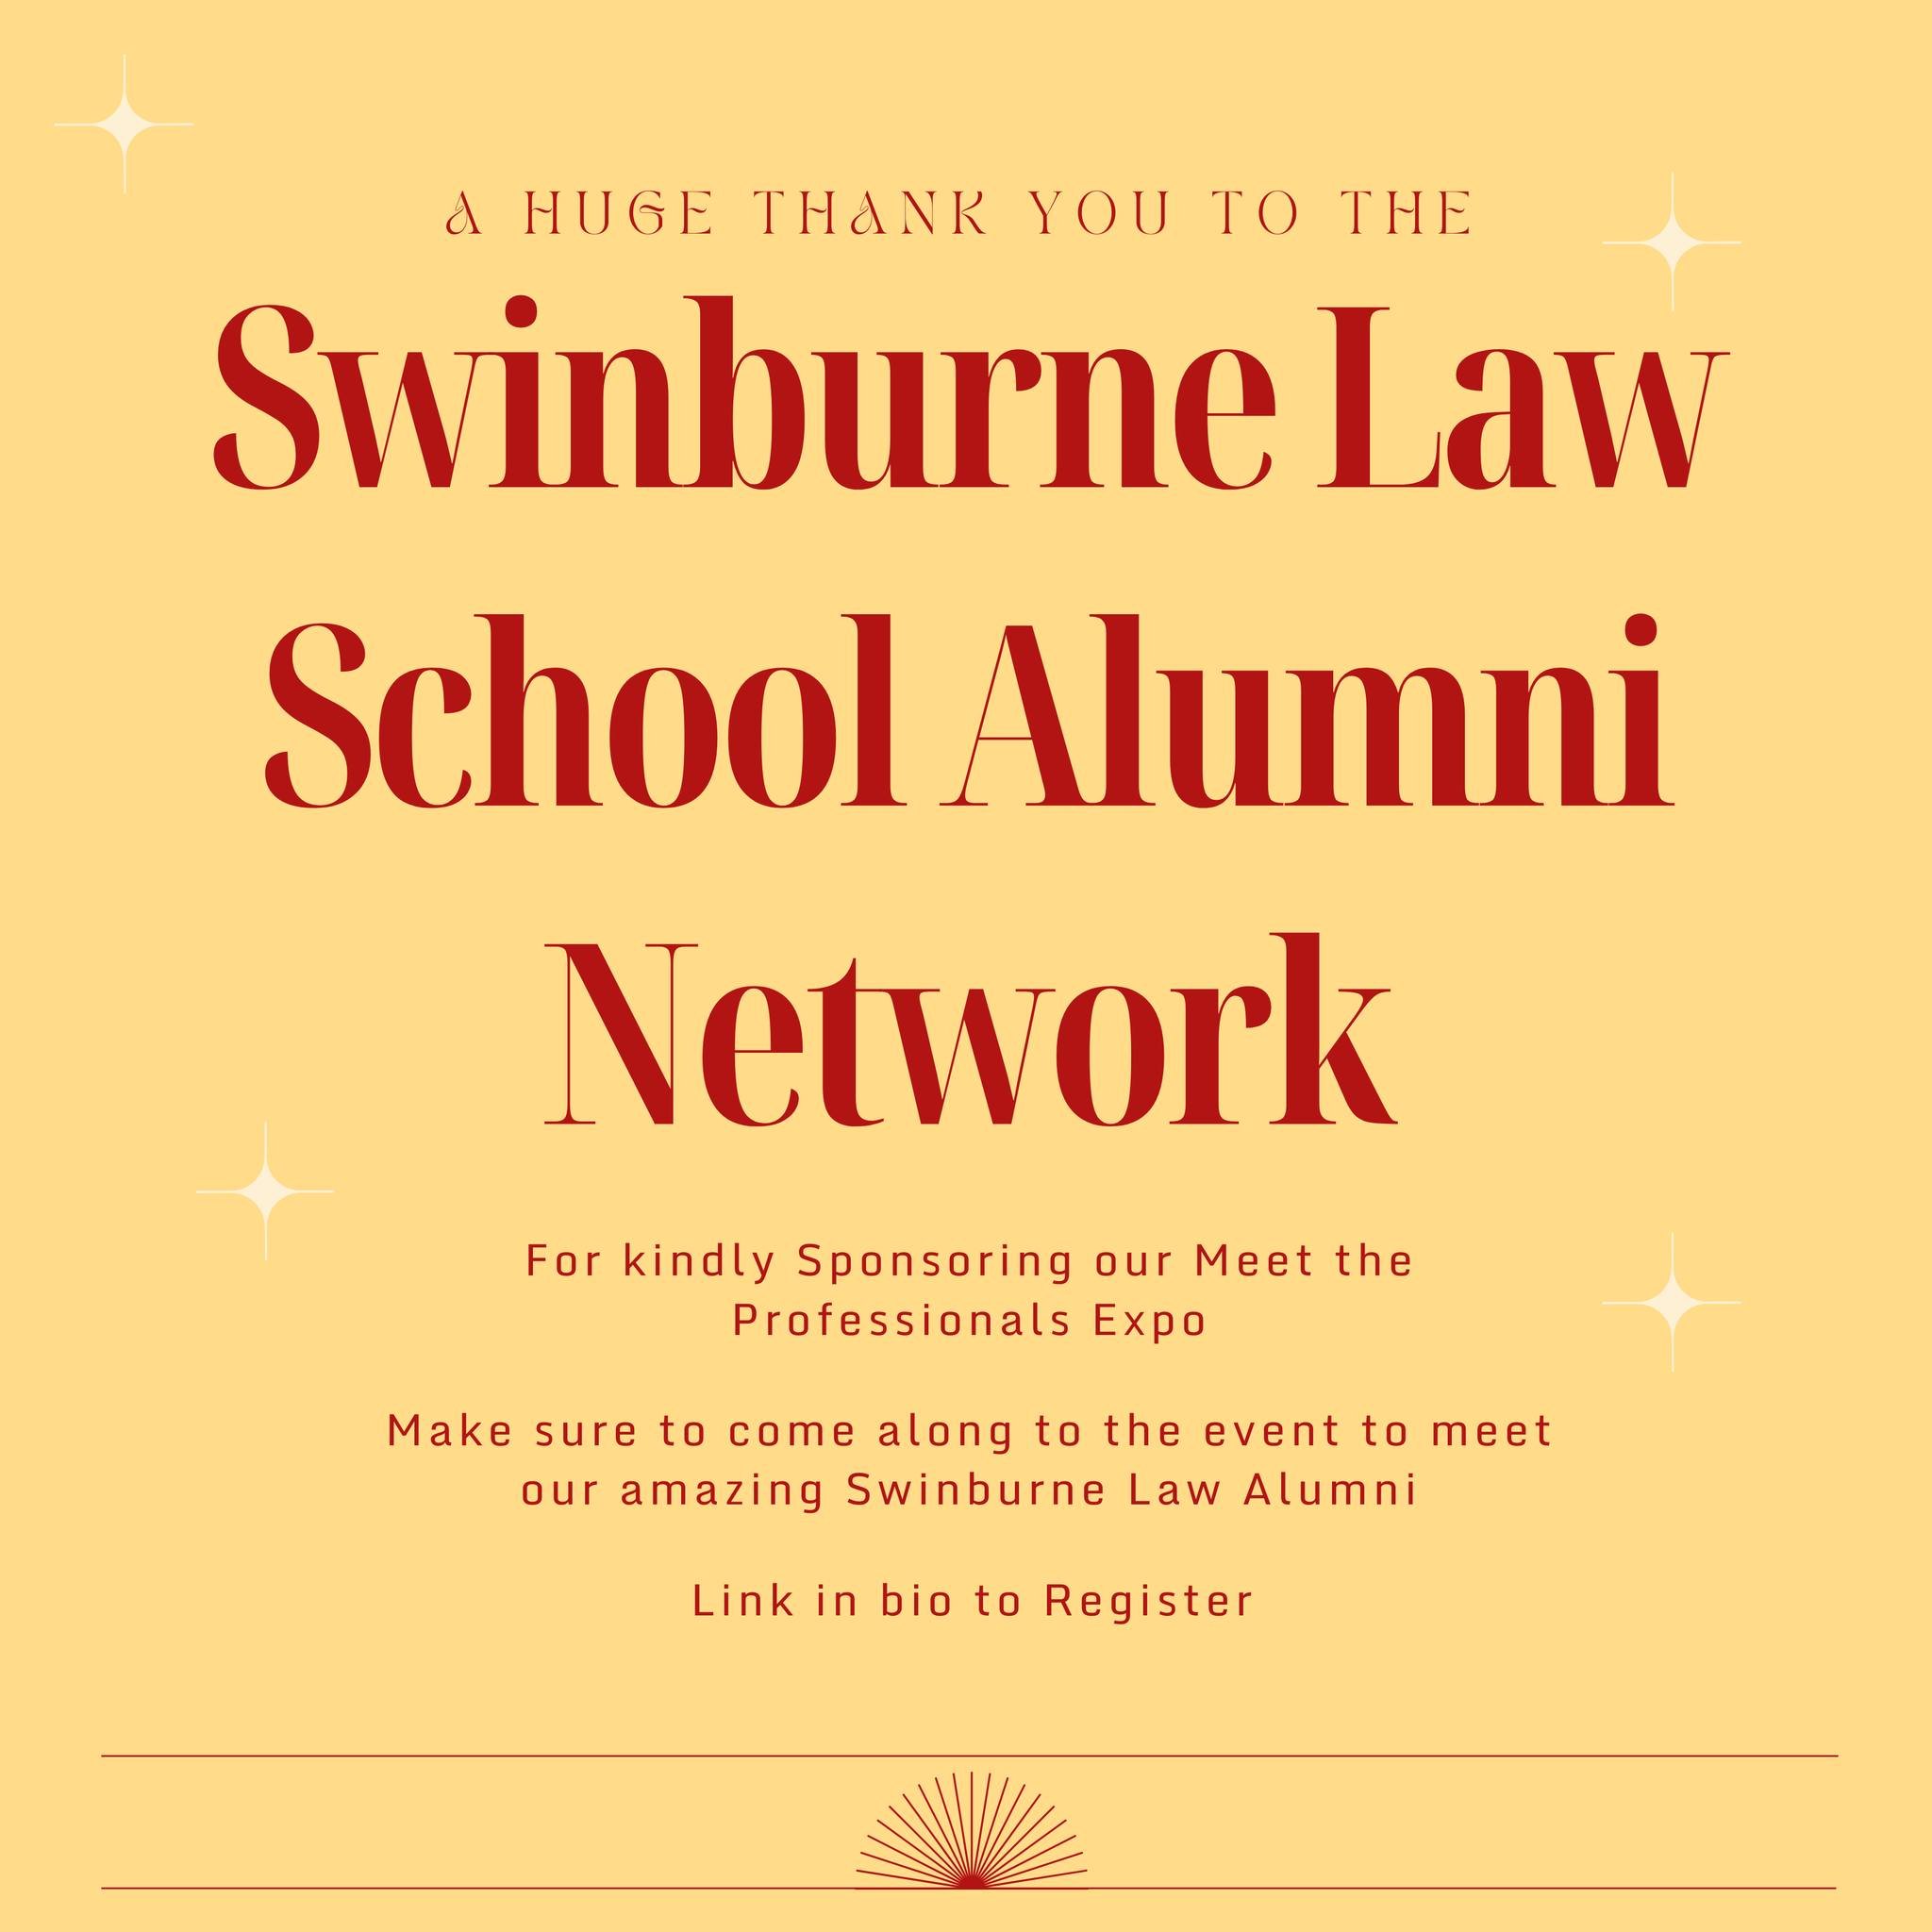 🎓 A heartfelt thank you to the amazing Swinburne Law School Alumni Network for their sponsorship of our Meet the Professionals Expo! 

🙌 Join us this Wednesday for an unforgettable professional development event. Connect with industry leaders, gain